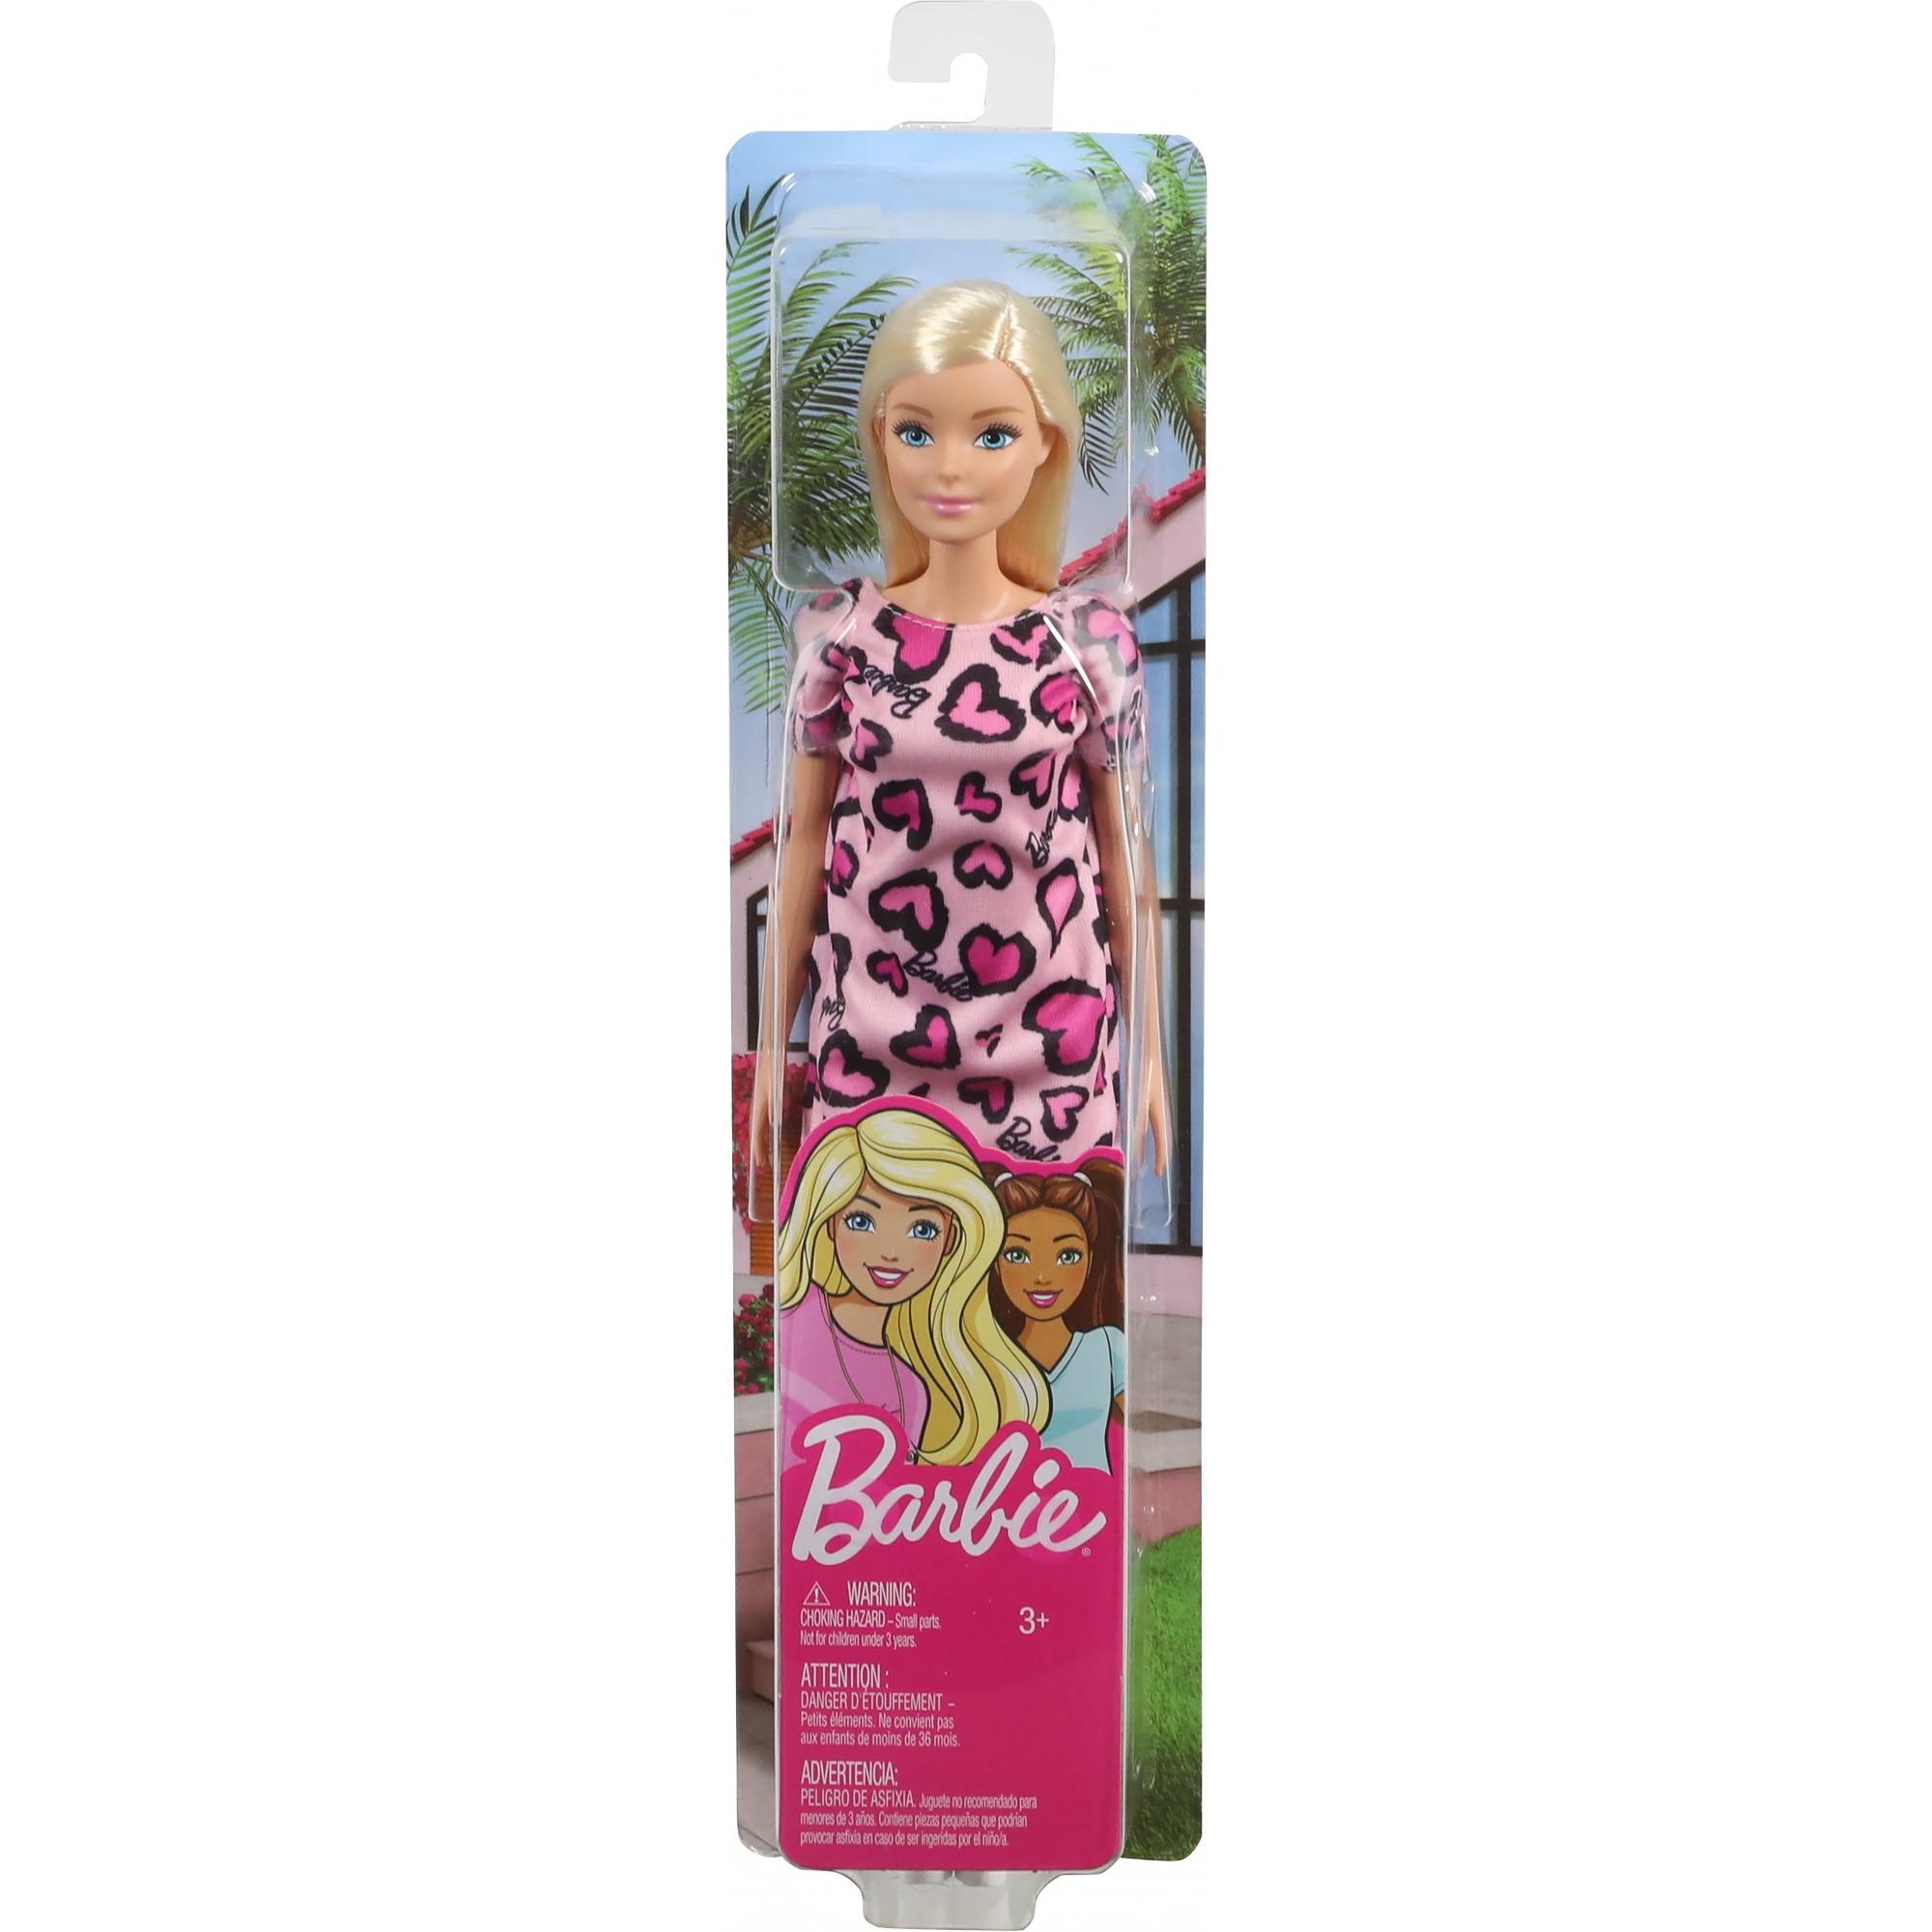 Barbie Doll, Blonde, Wearing Pink Heart-Print Dress And Shoes - image 6 of 6